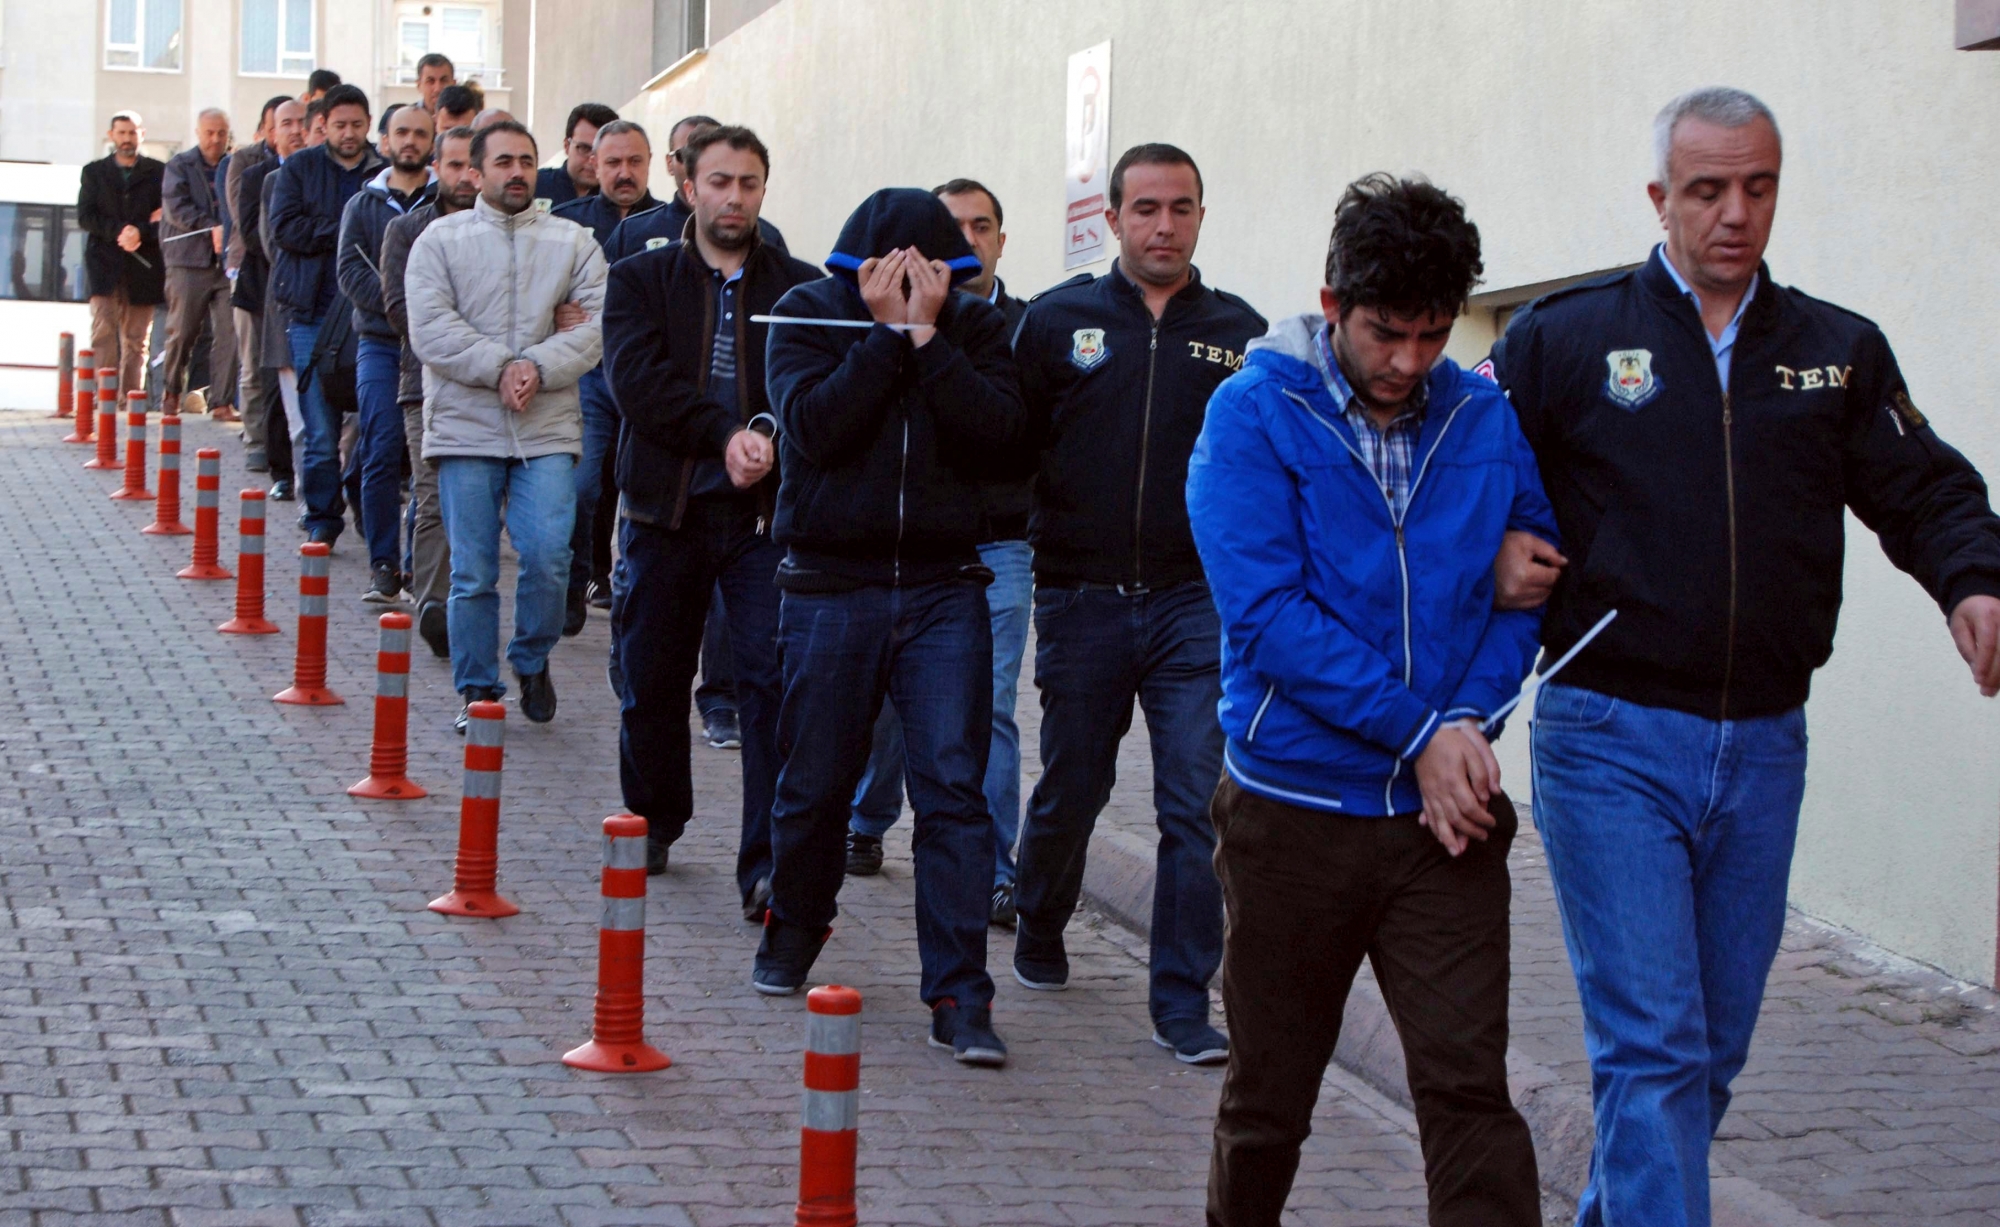 Police officers escort people, arrested because of suspected links to U.S.-based cleric Fethullah Gulen, in Kayseri, Turkey, Wednesday, April 26, 2017. Police launched simultaneous operations across the country on Wednesday, detaining hundreds of people with suspected links to U.S.-based cleric Fethullah Gulen. The suspects are allegedly Gulen operatives who directed followers within the police force. (Olay Duzgun/DHA-Depo Photos via AP) Turkey Failed Coup